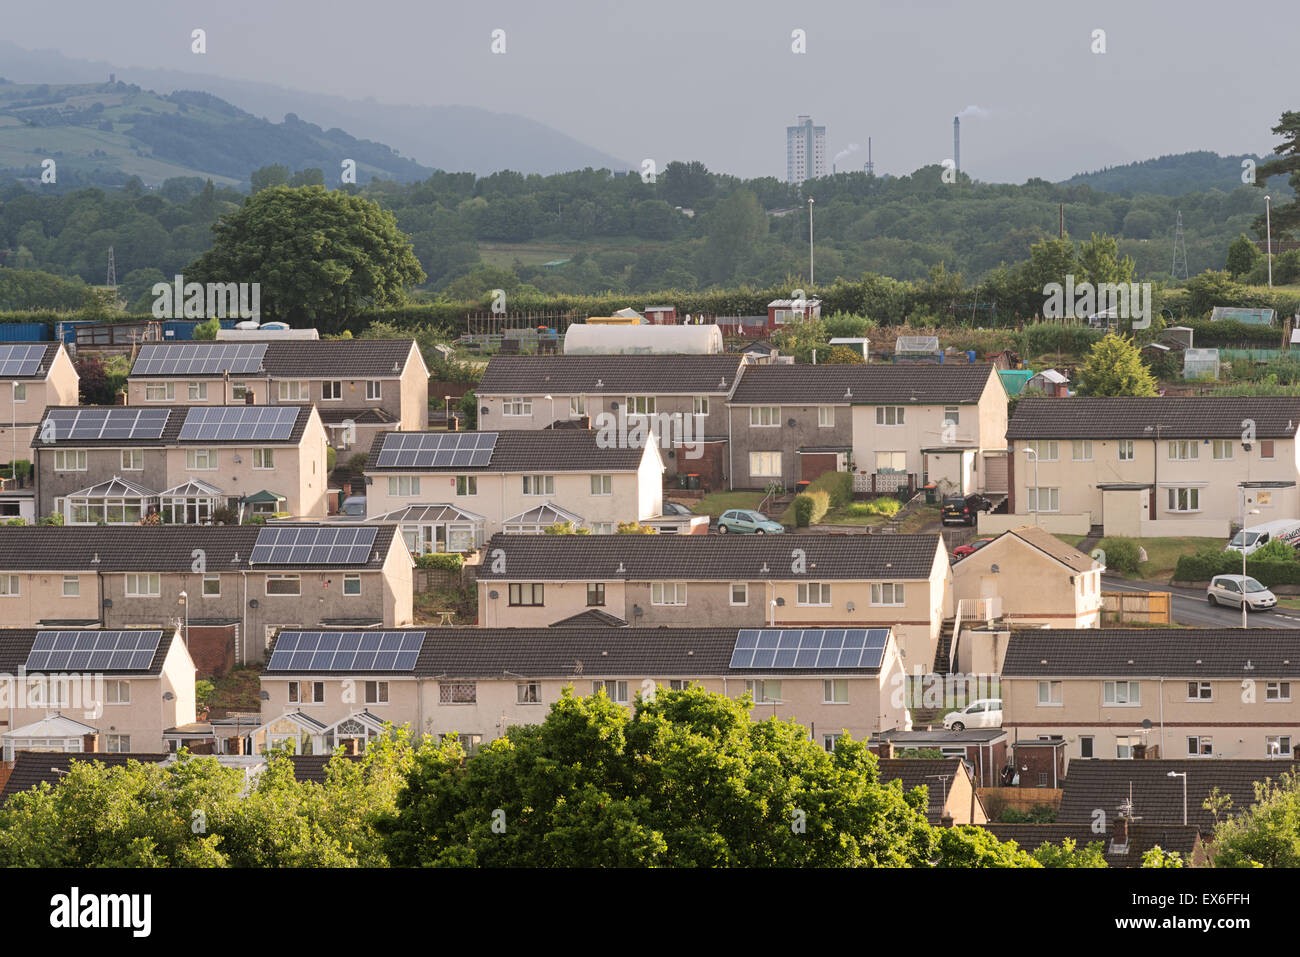 Sunlit housing with solar panelling on the roofs in the Bettws area of Newport City, Wales, Cwmbran can be seen in the distance. Stock Photo